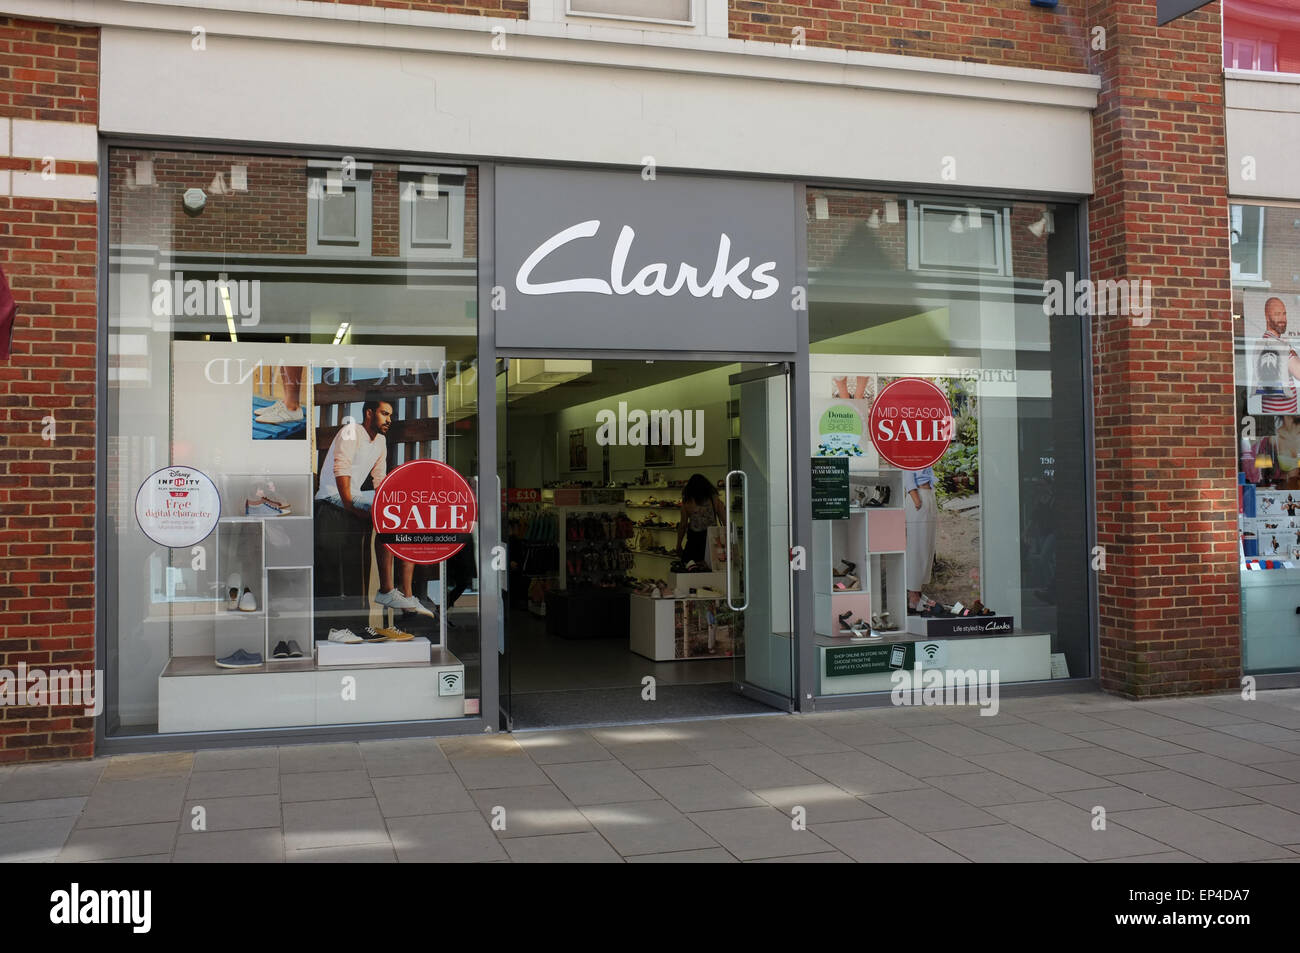 clarks retail outlet